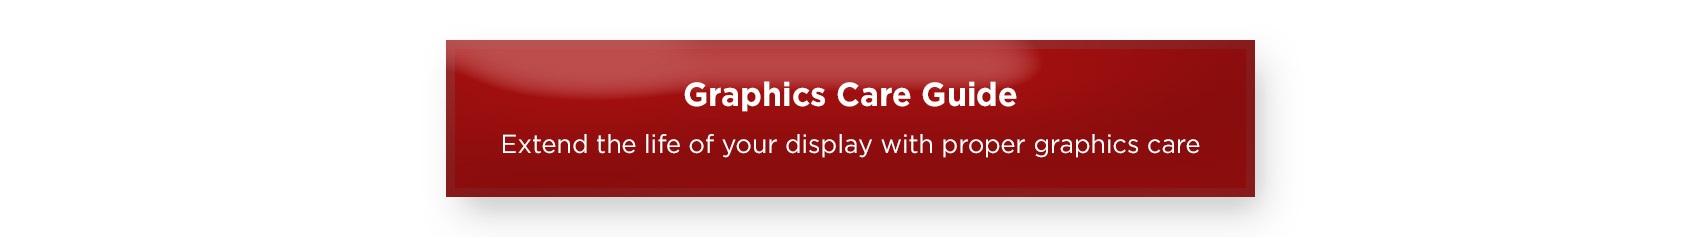 How to care for graphics